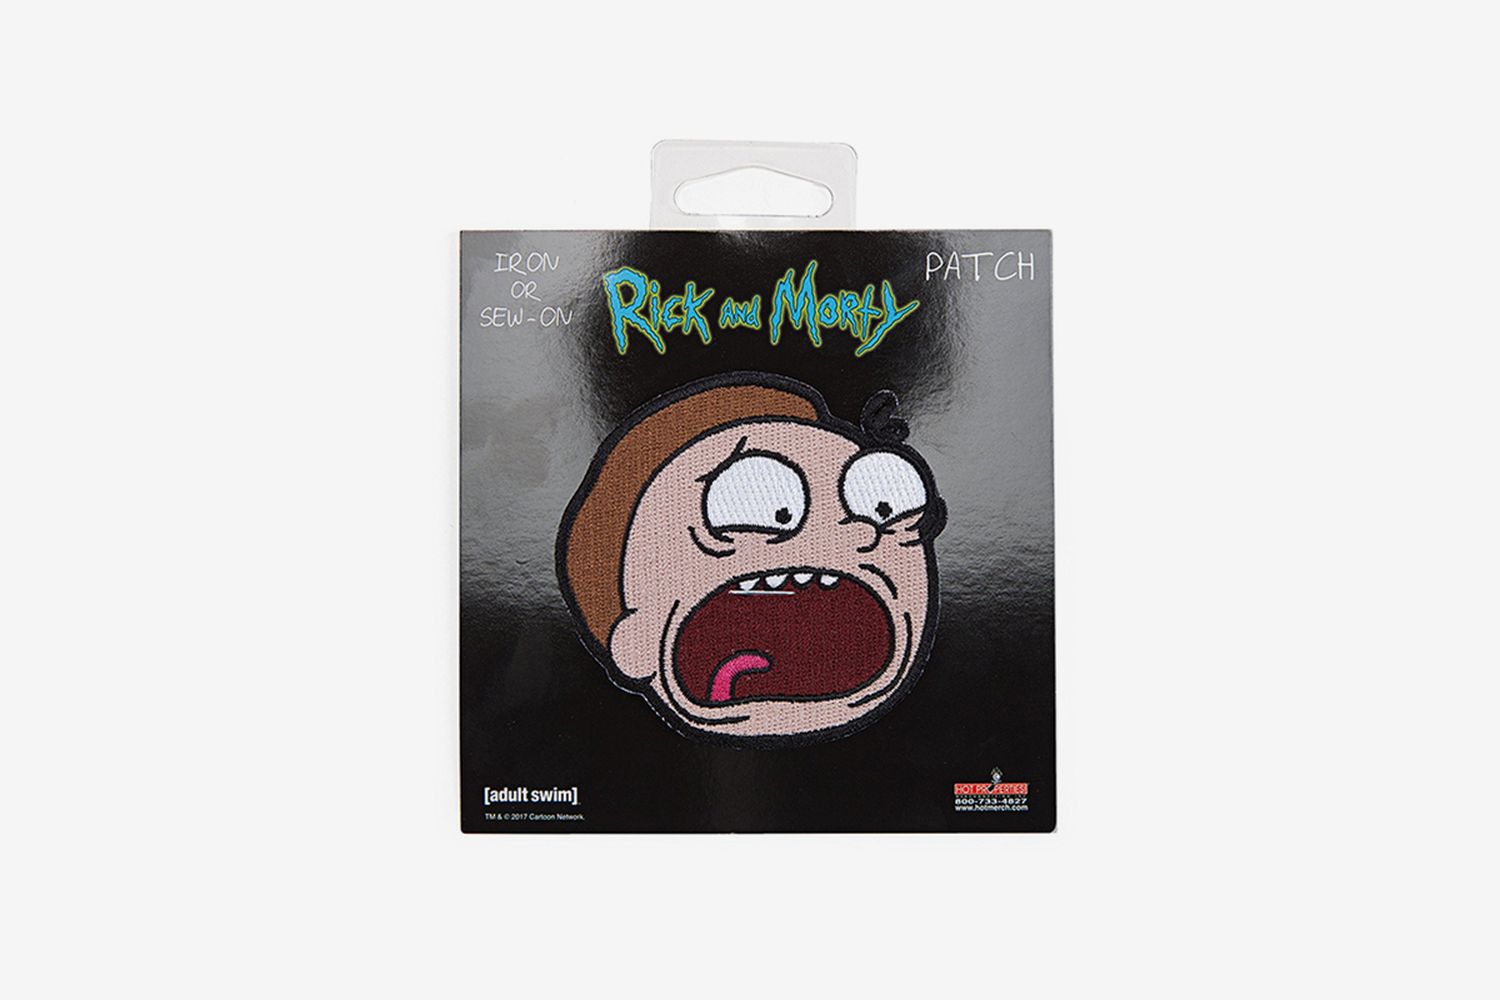 Morty Patch